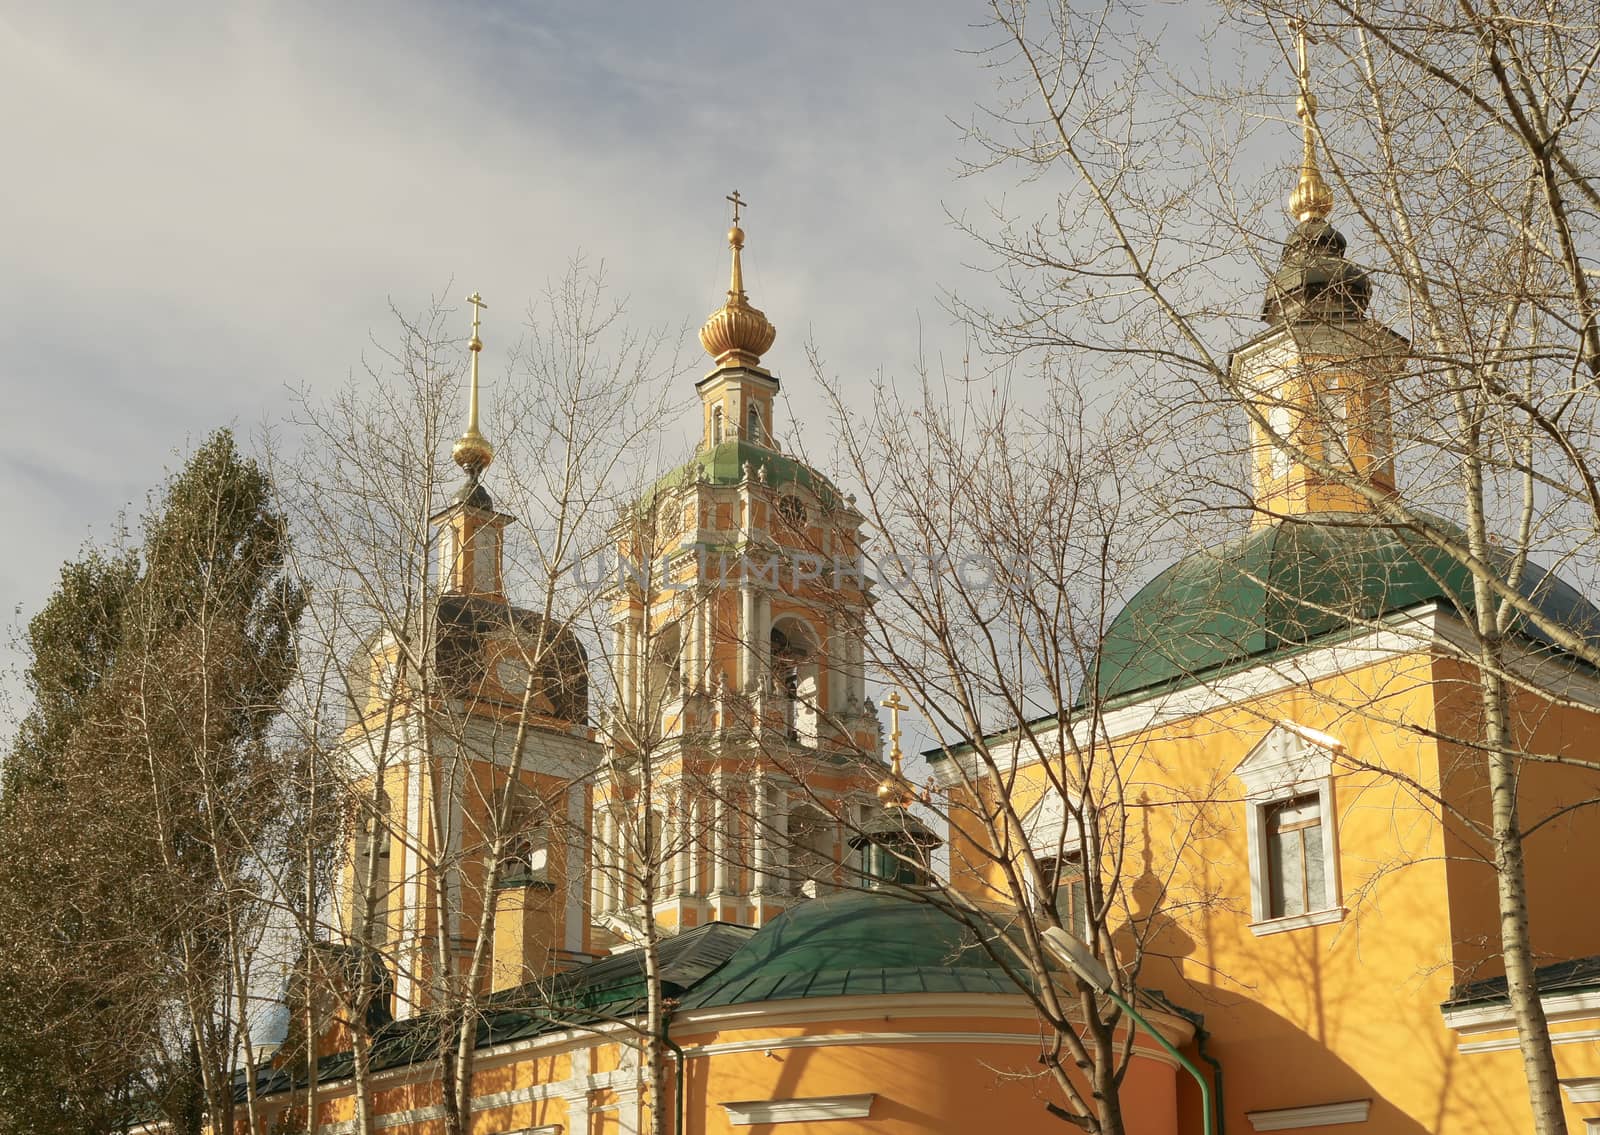 Forty Martyrs Church and bell tower of Novospasski Monastery in Moscow on a clear autumn day